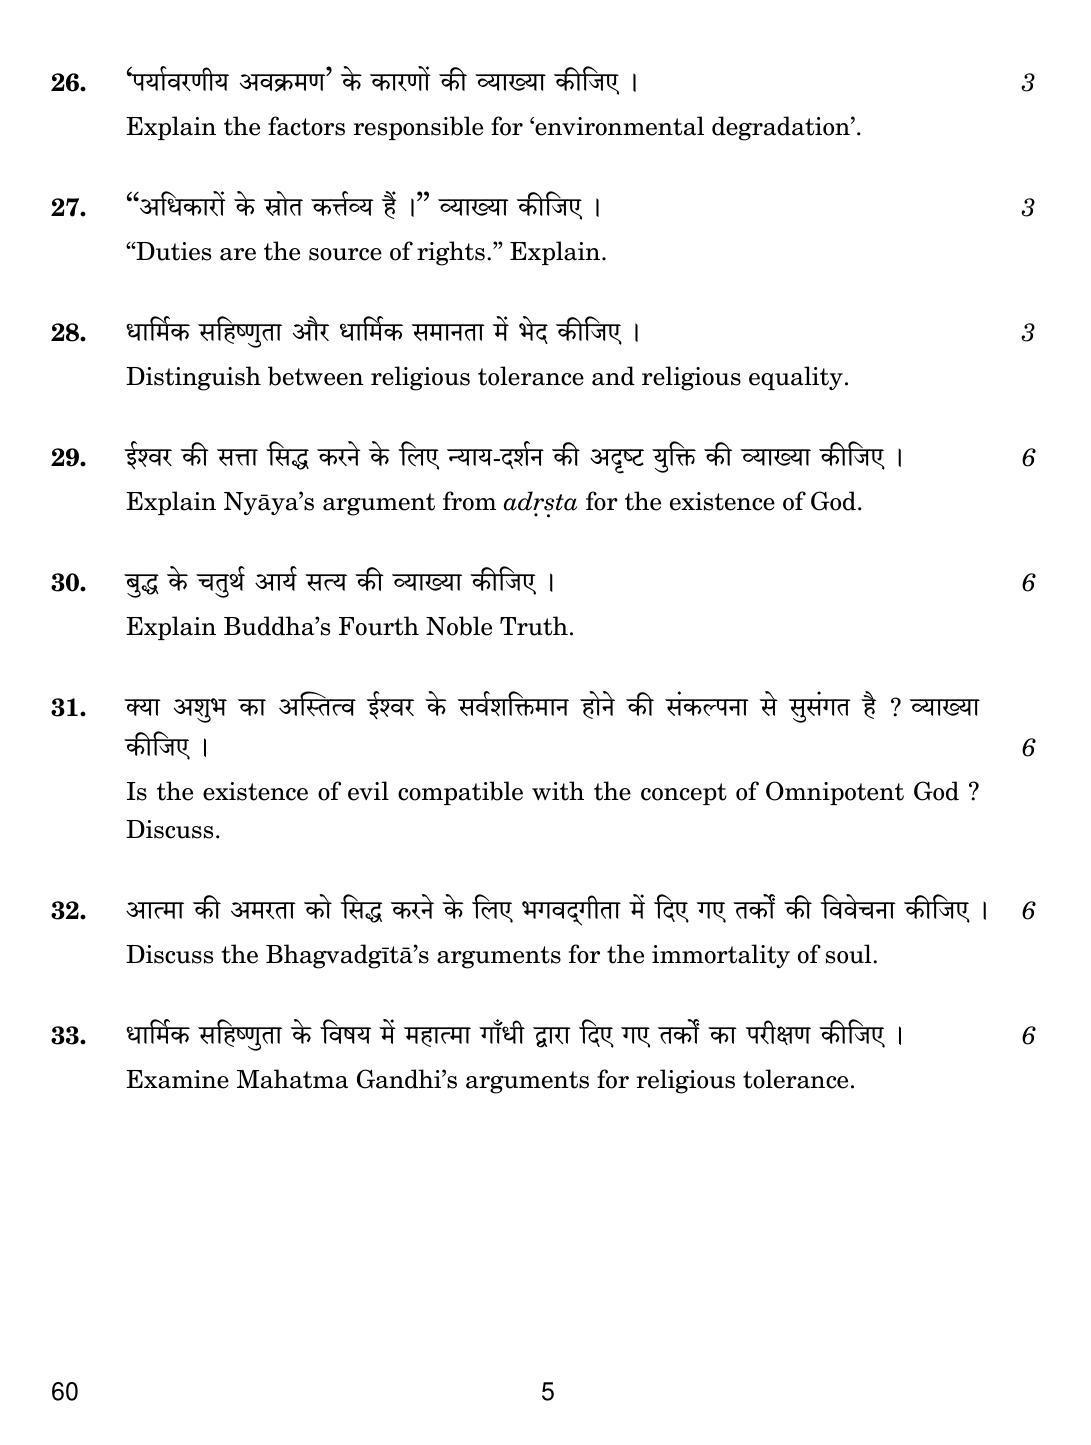 CBSE Class 12 60 PHILOSOPHY 2019 Compartment Question Paper - Page 5